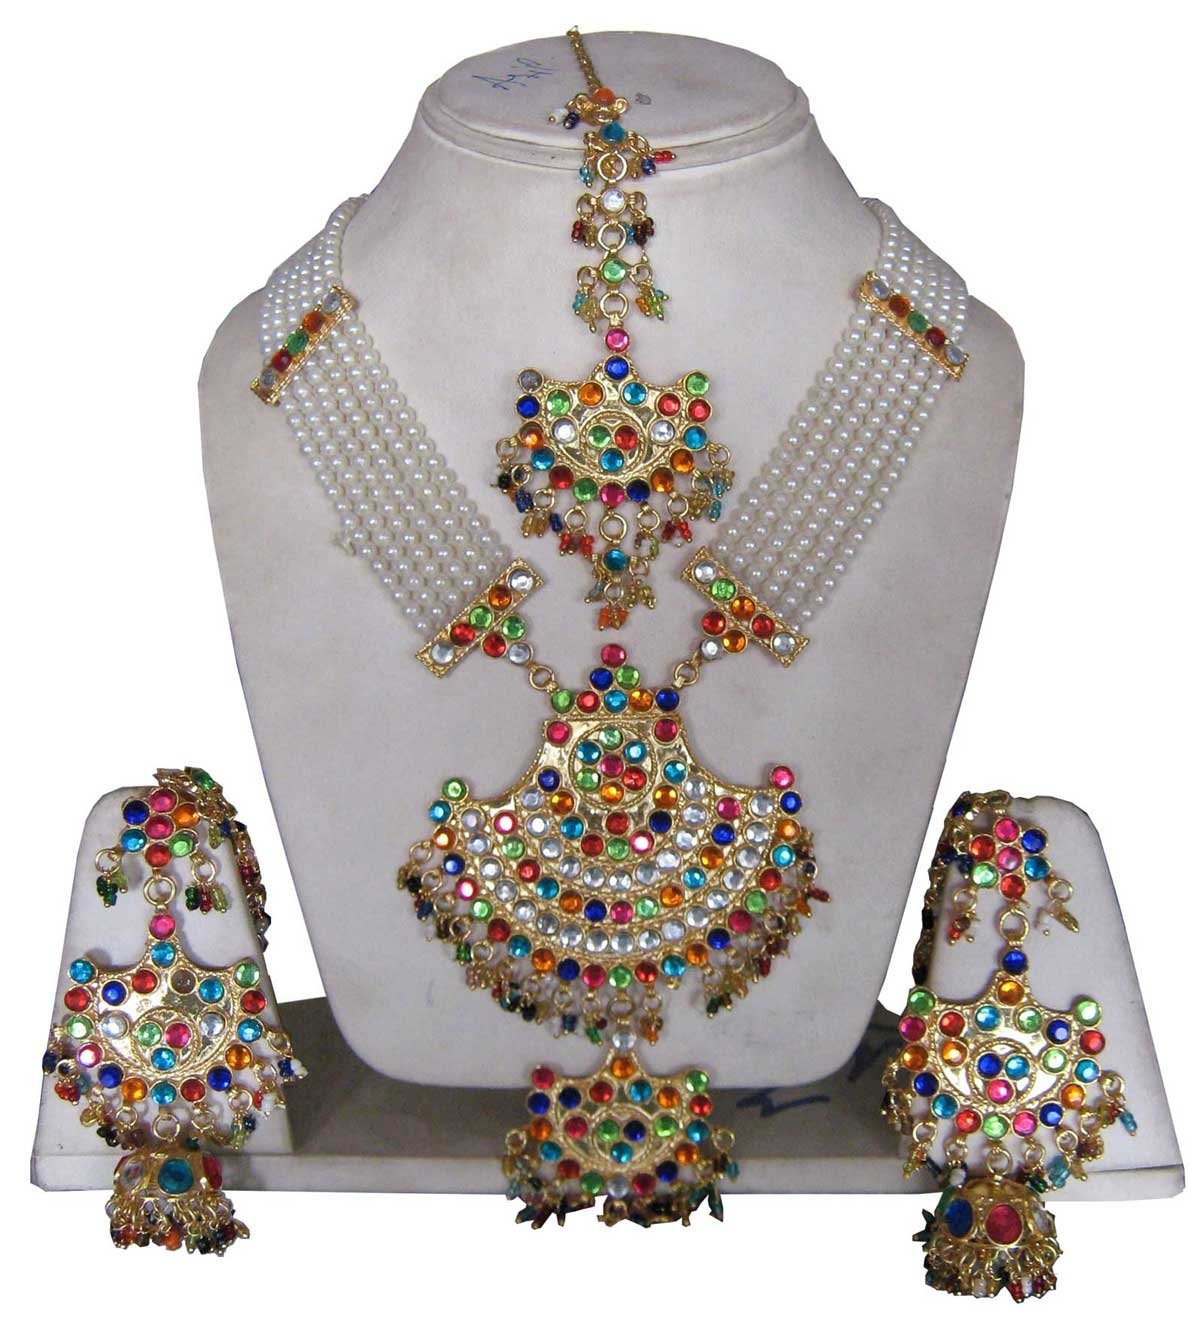 http://www.yusrablog.com/wp-content/uploads/2010/12/Indian-Costume-Jewelry-Set-for-Indian-Girls.jpg